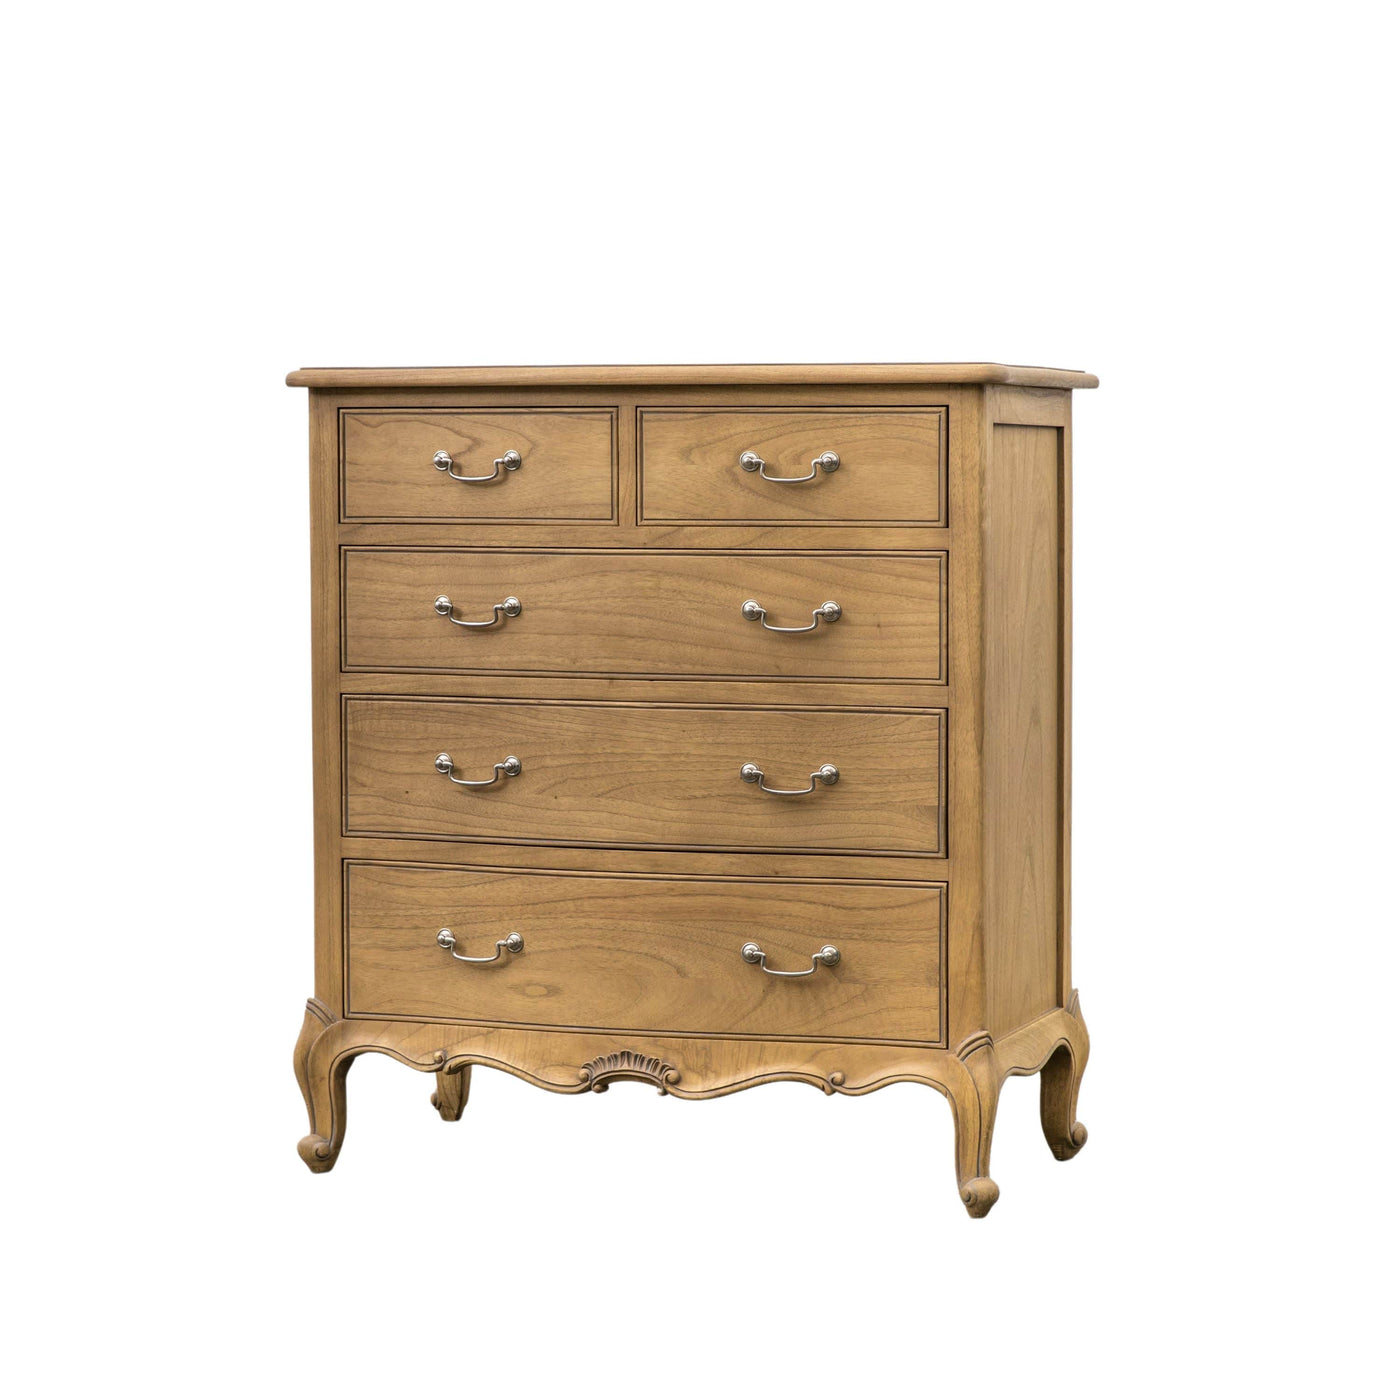 Bodhi Sleeping Blowinghouse 5 Drawer Chest Weathered House of Isabella UK